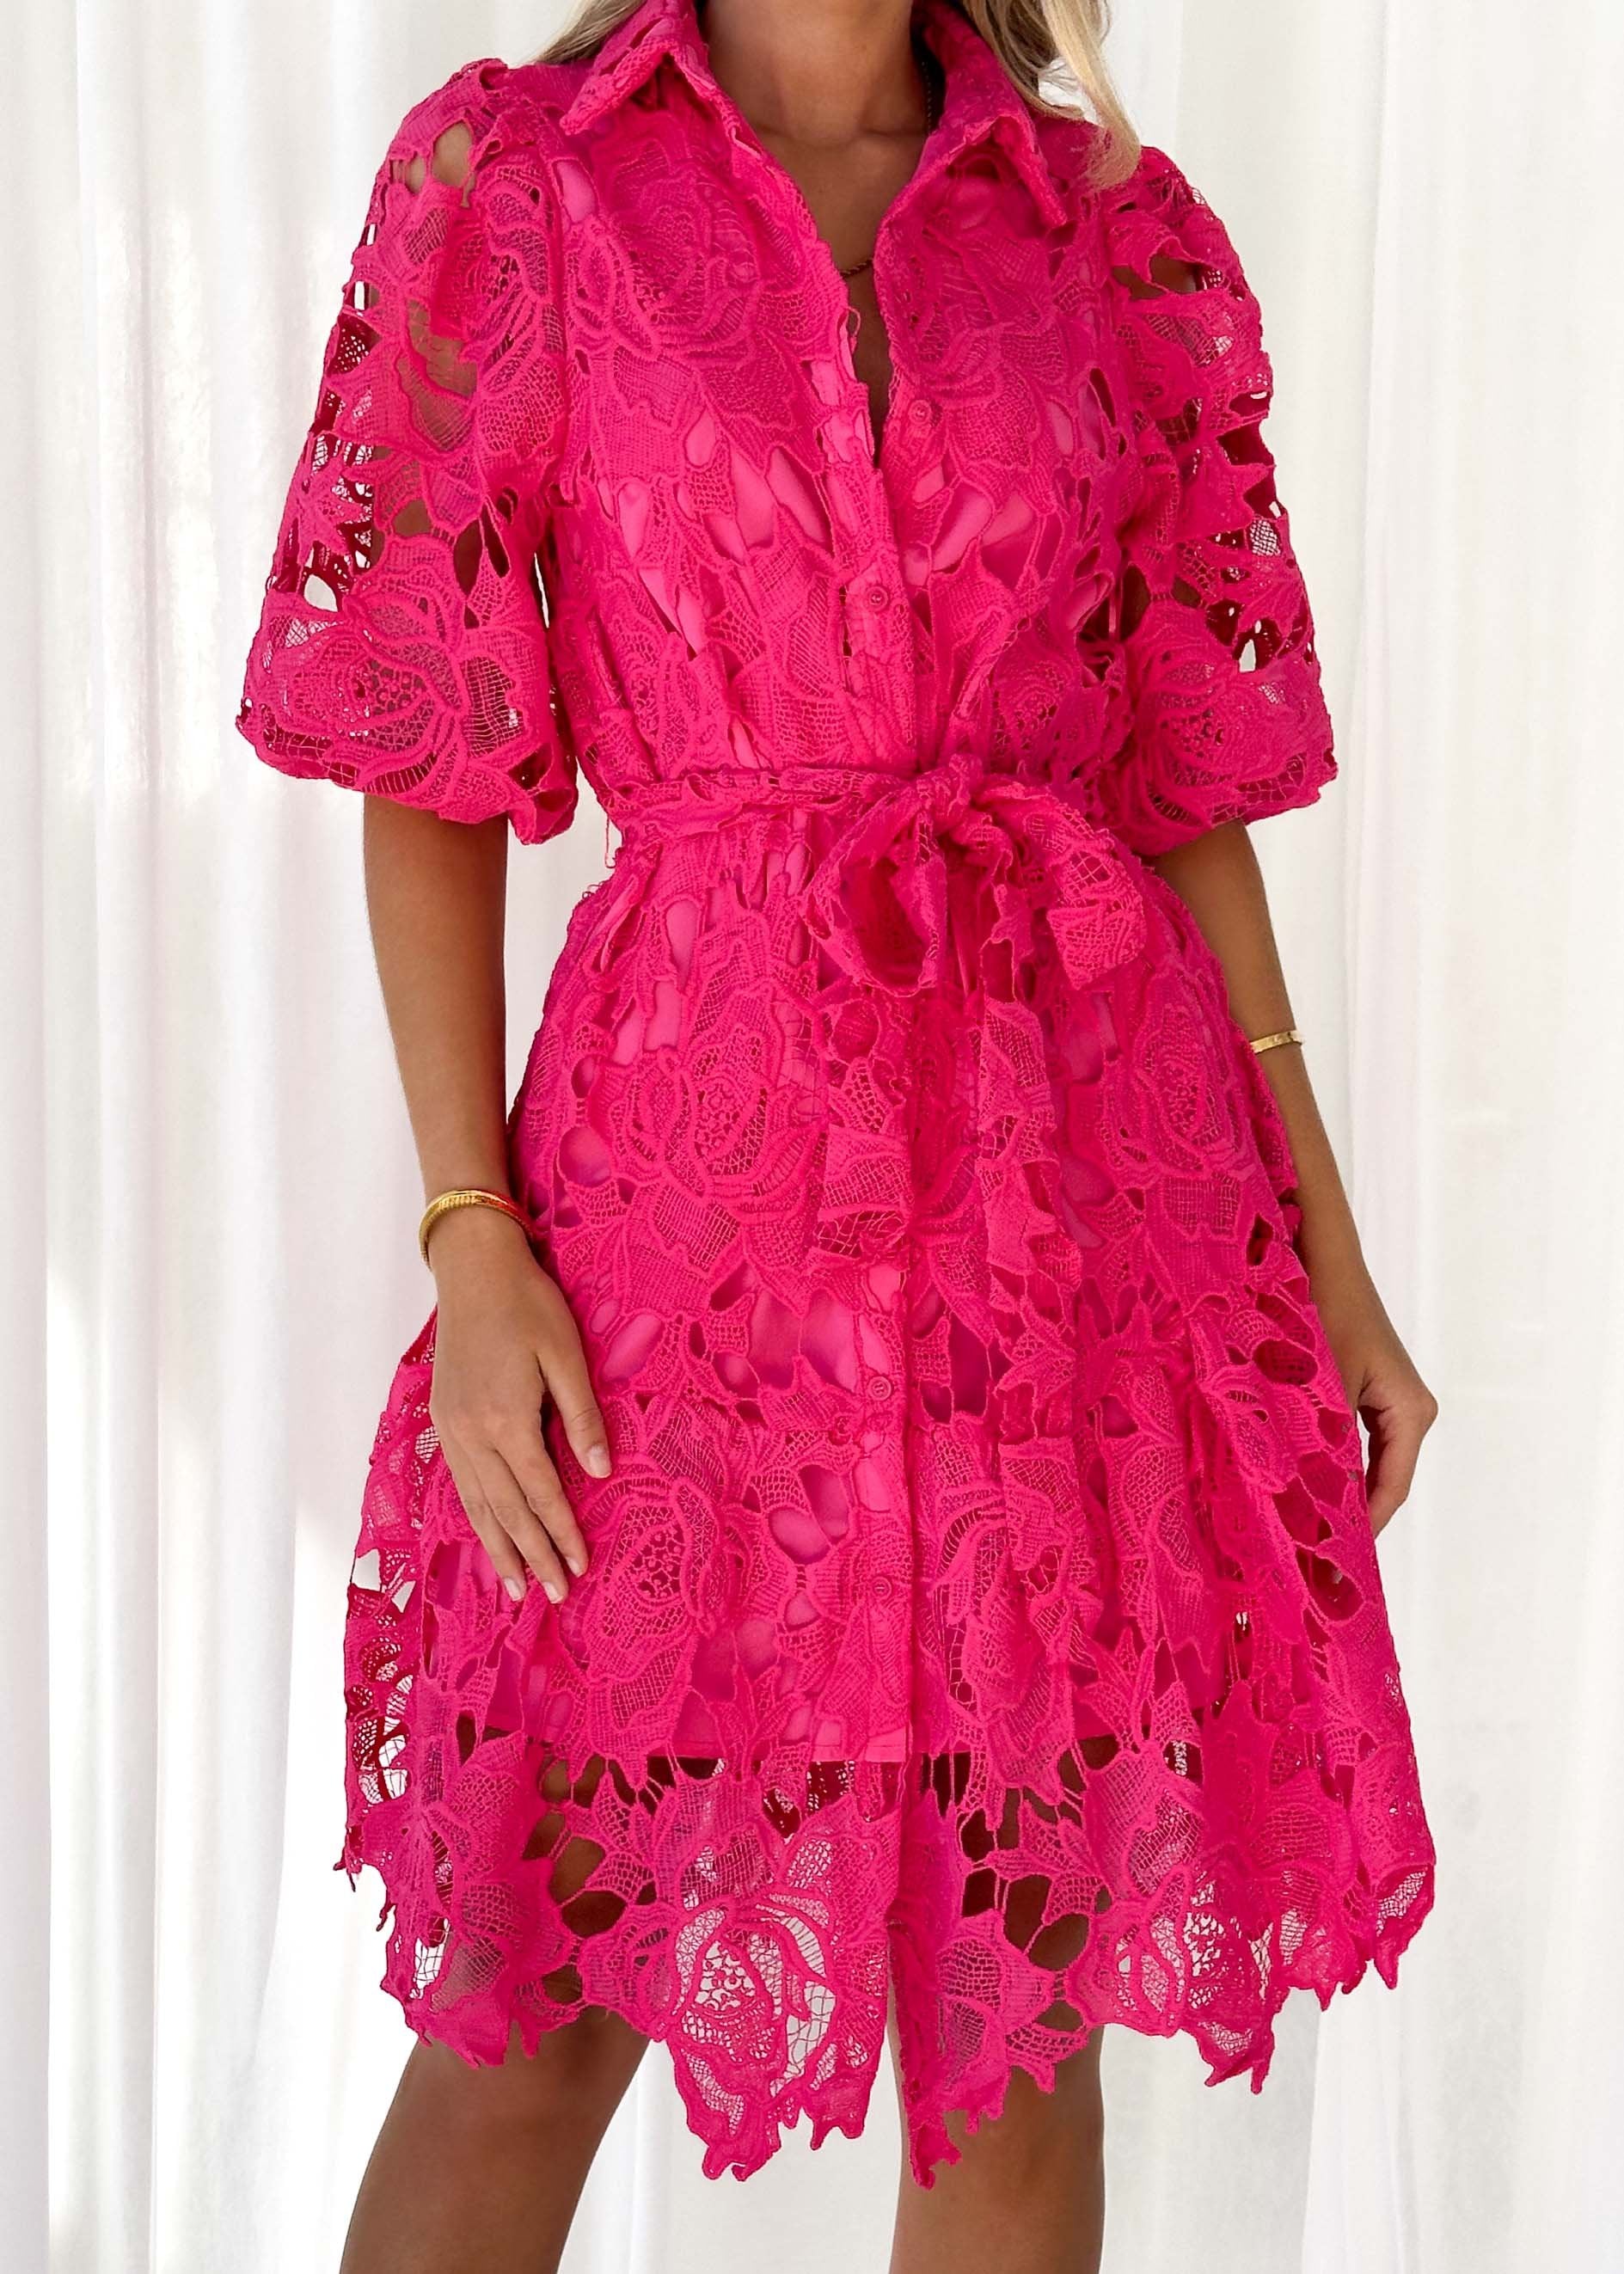 Doller Lace Dress - Hot Pink